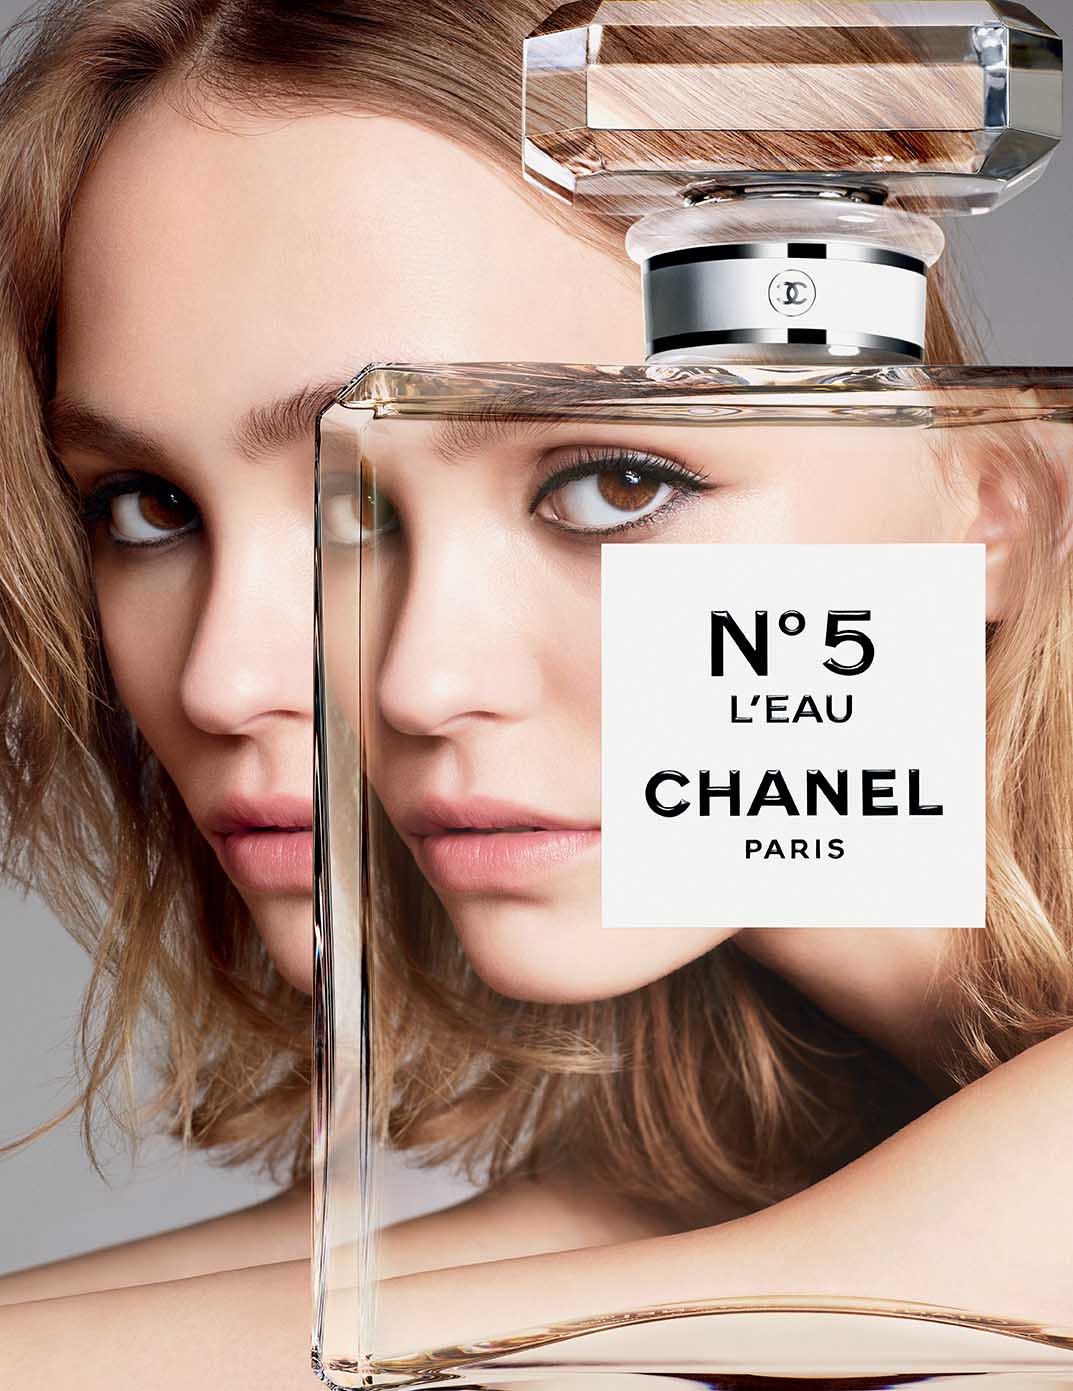 Chanel  L'Eau starring Lily-Rose Depp has been unveiled